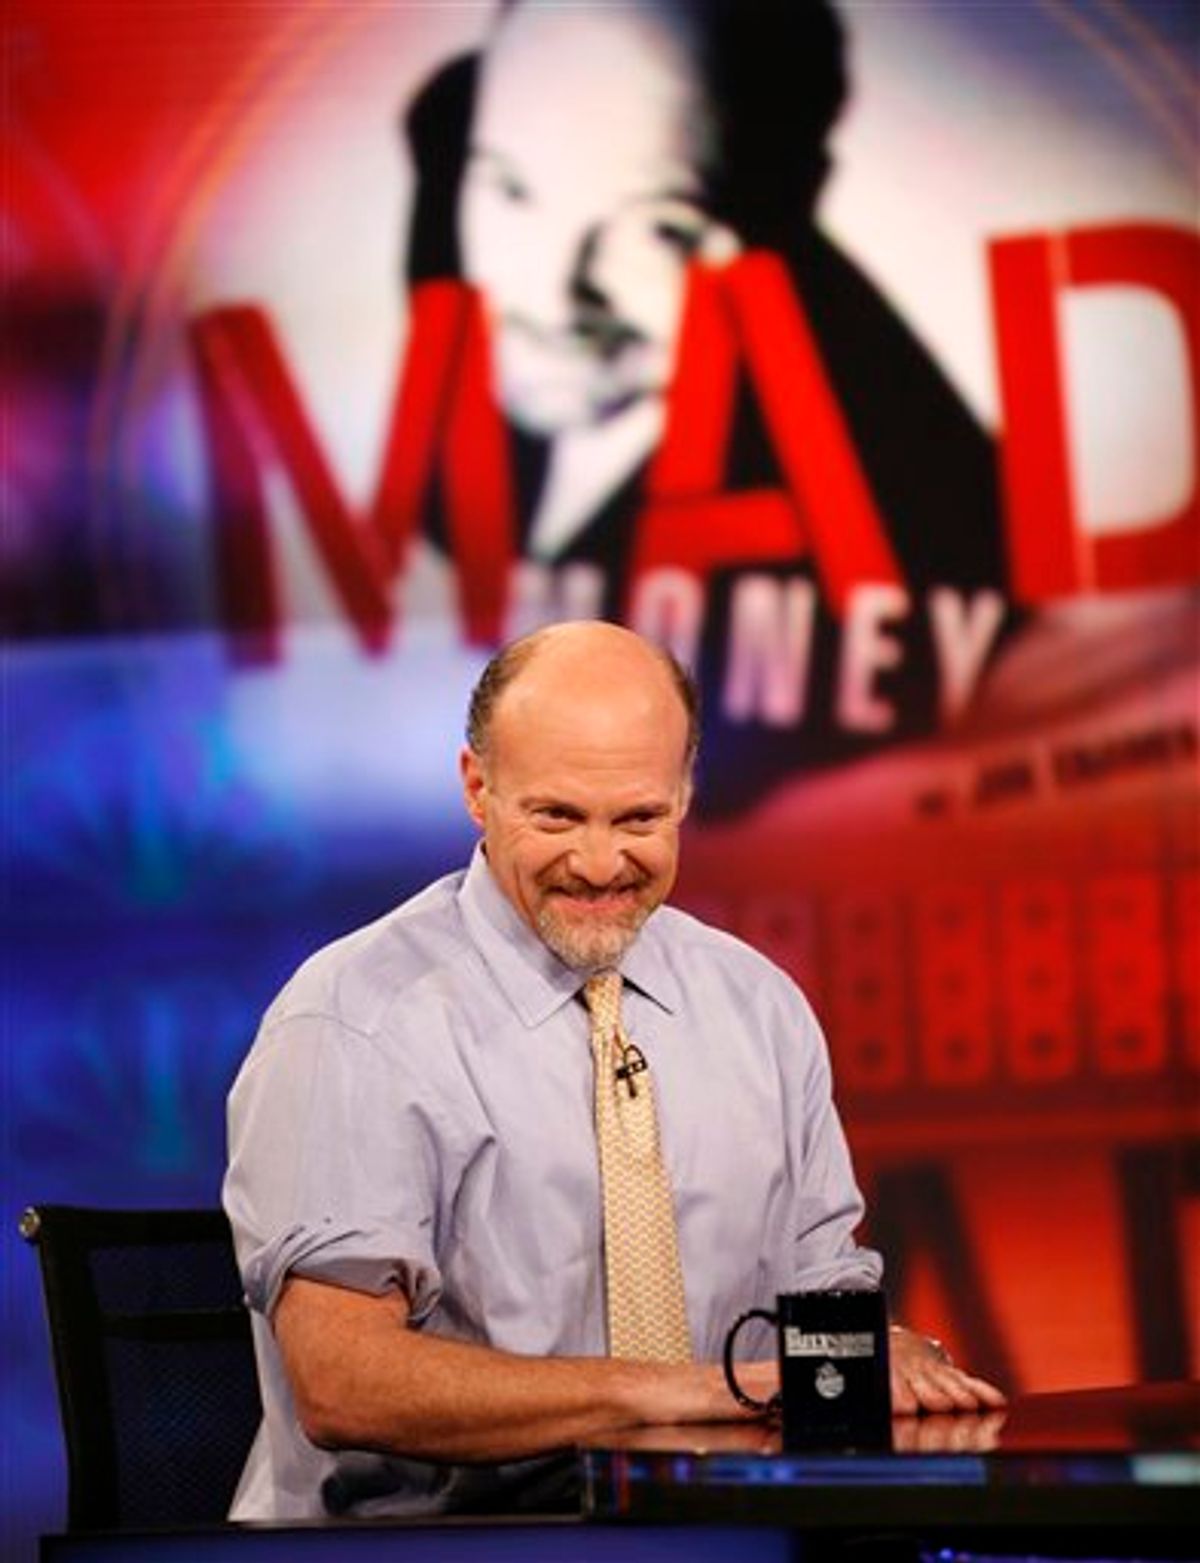 FILE - In this March 12, 2009 file photo, Jim Cramer, host of the "Mad Money" show on CNBC, makes an appearance on Comedy Central's "The Daily Show with Jon Stewart" in New York.  (AP Photo/Jason DeCrow, File) (AP)